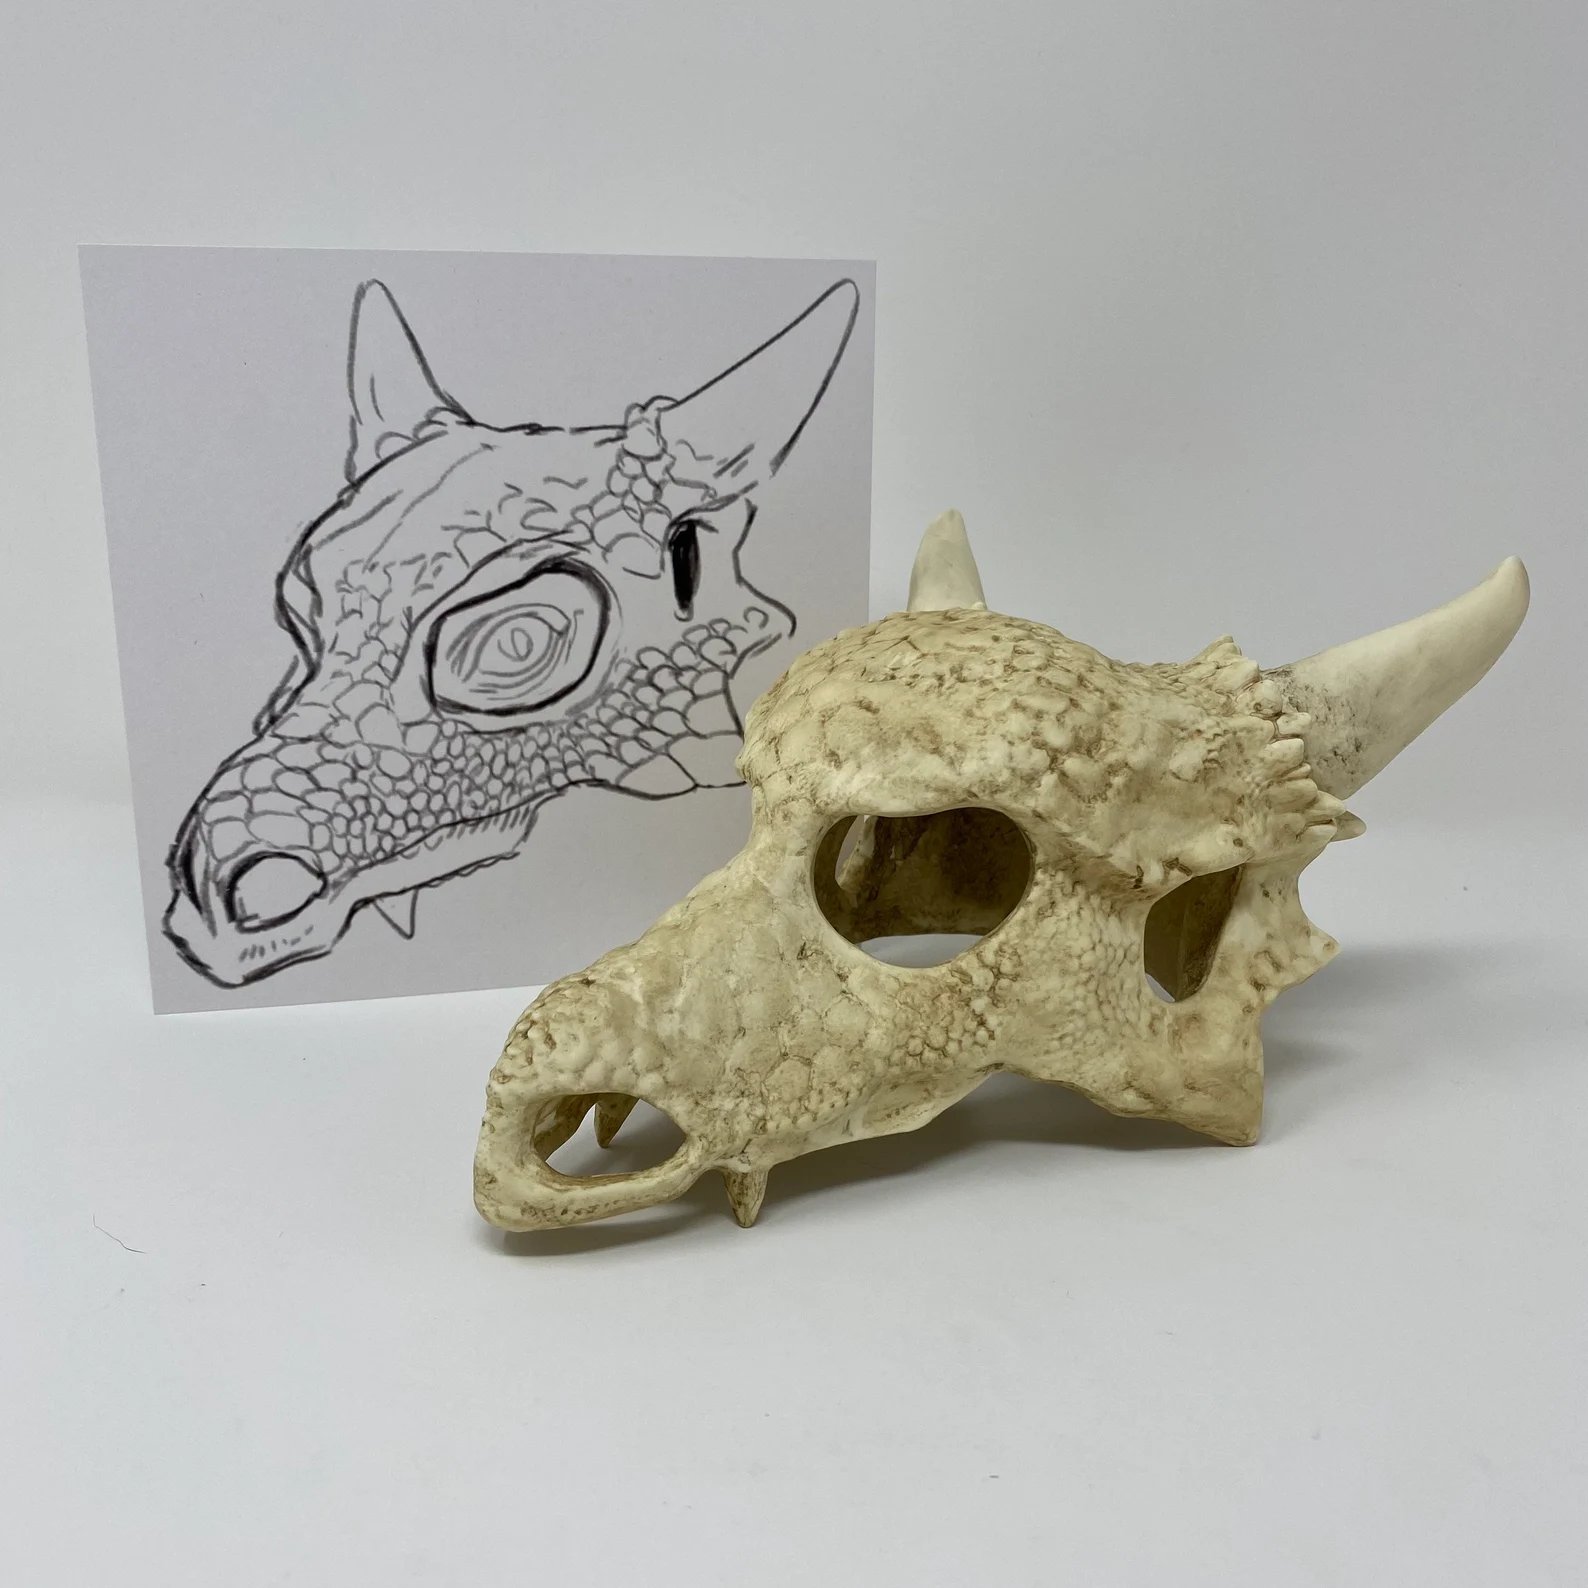 RJ Palmer 在Twitter 上："So I designed a realistic Cubone skull for and they went ahead and made the thing. Its so cool to have one on my desk It